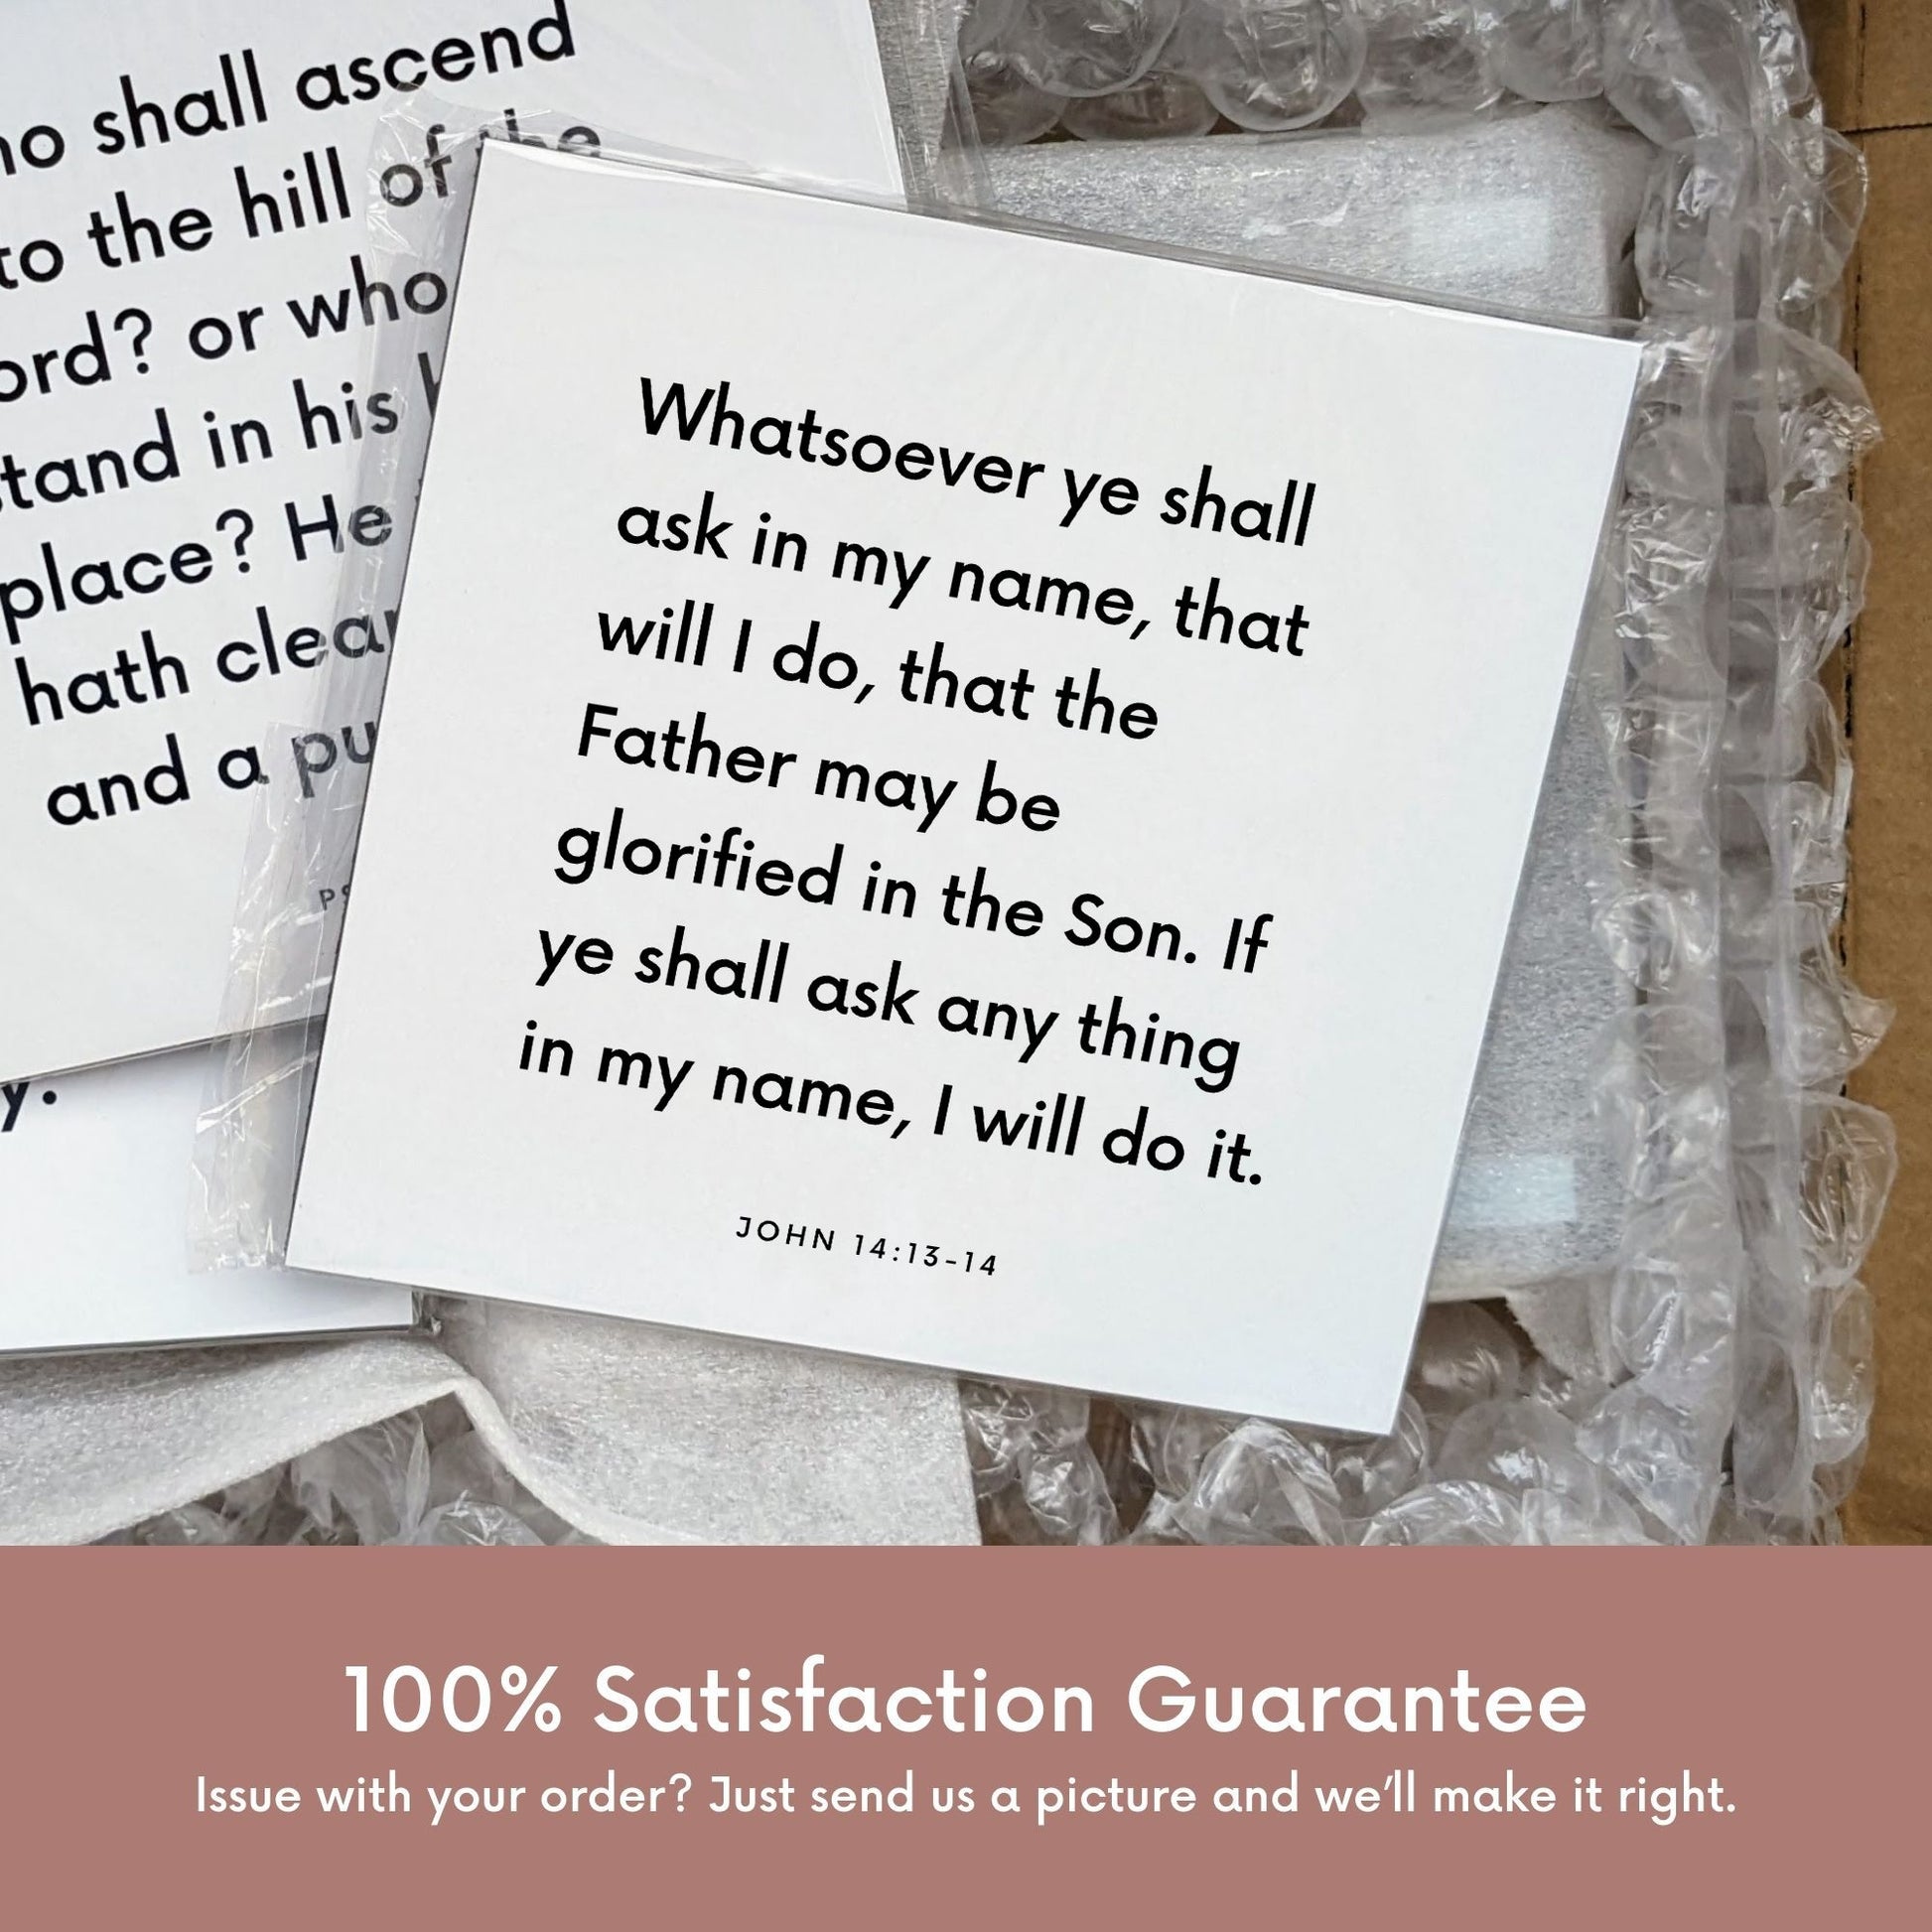 Shipping materials for scripture tile of John 14:13-14 - "Whatsoever ye shall ask in my name, that will I do"